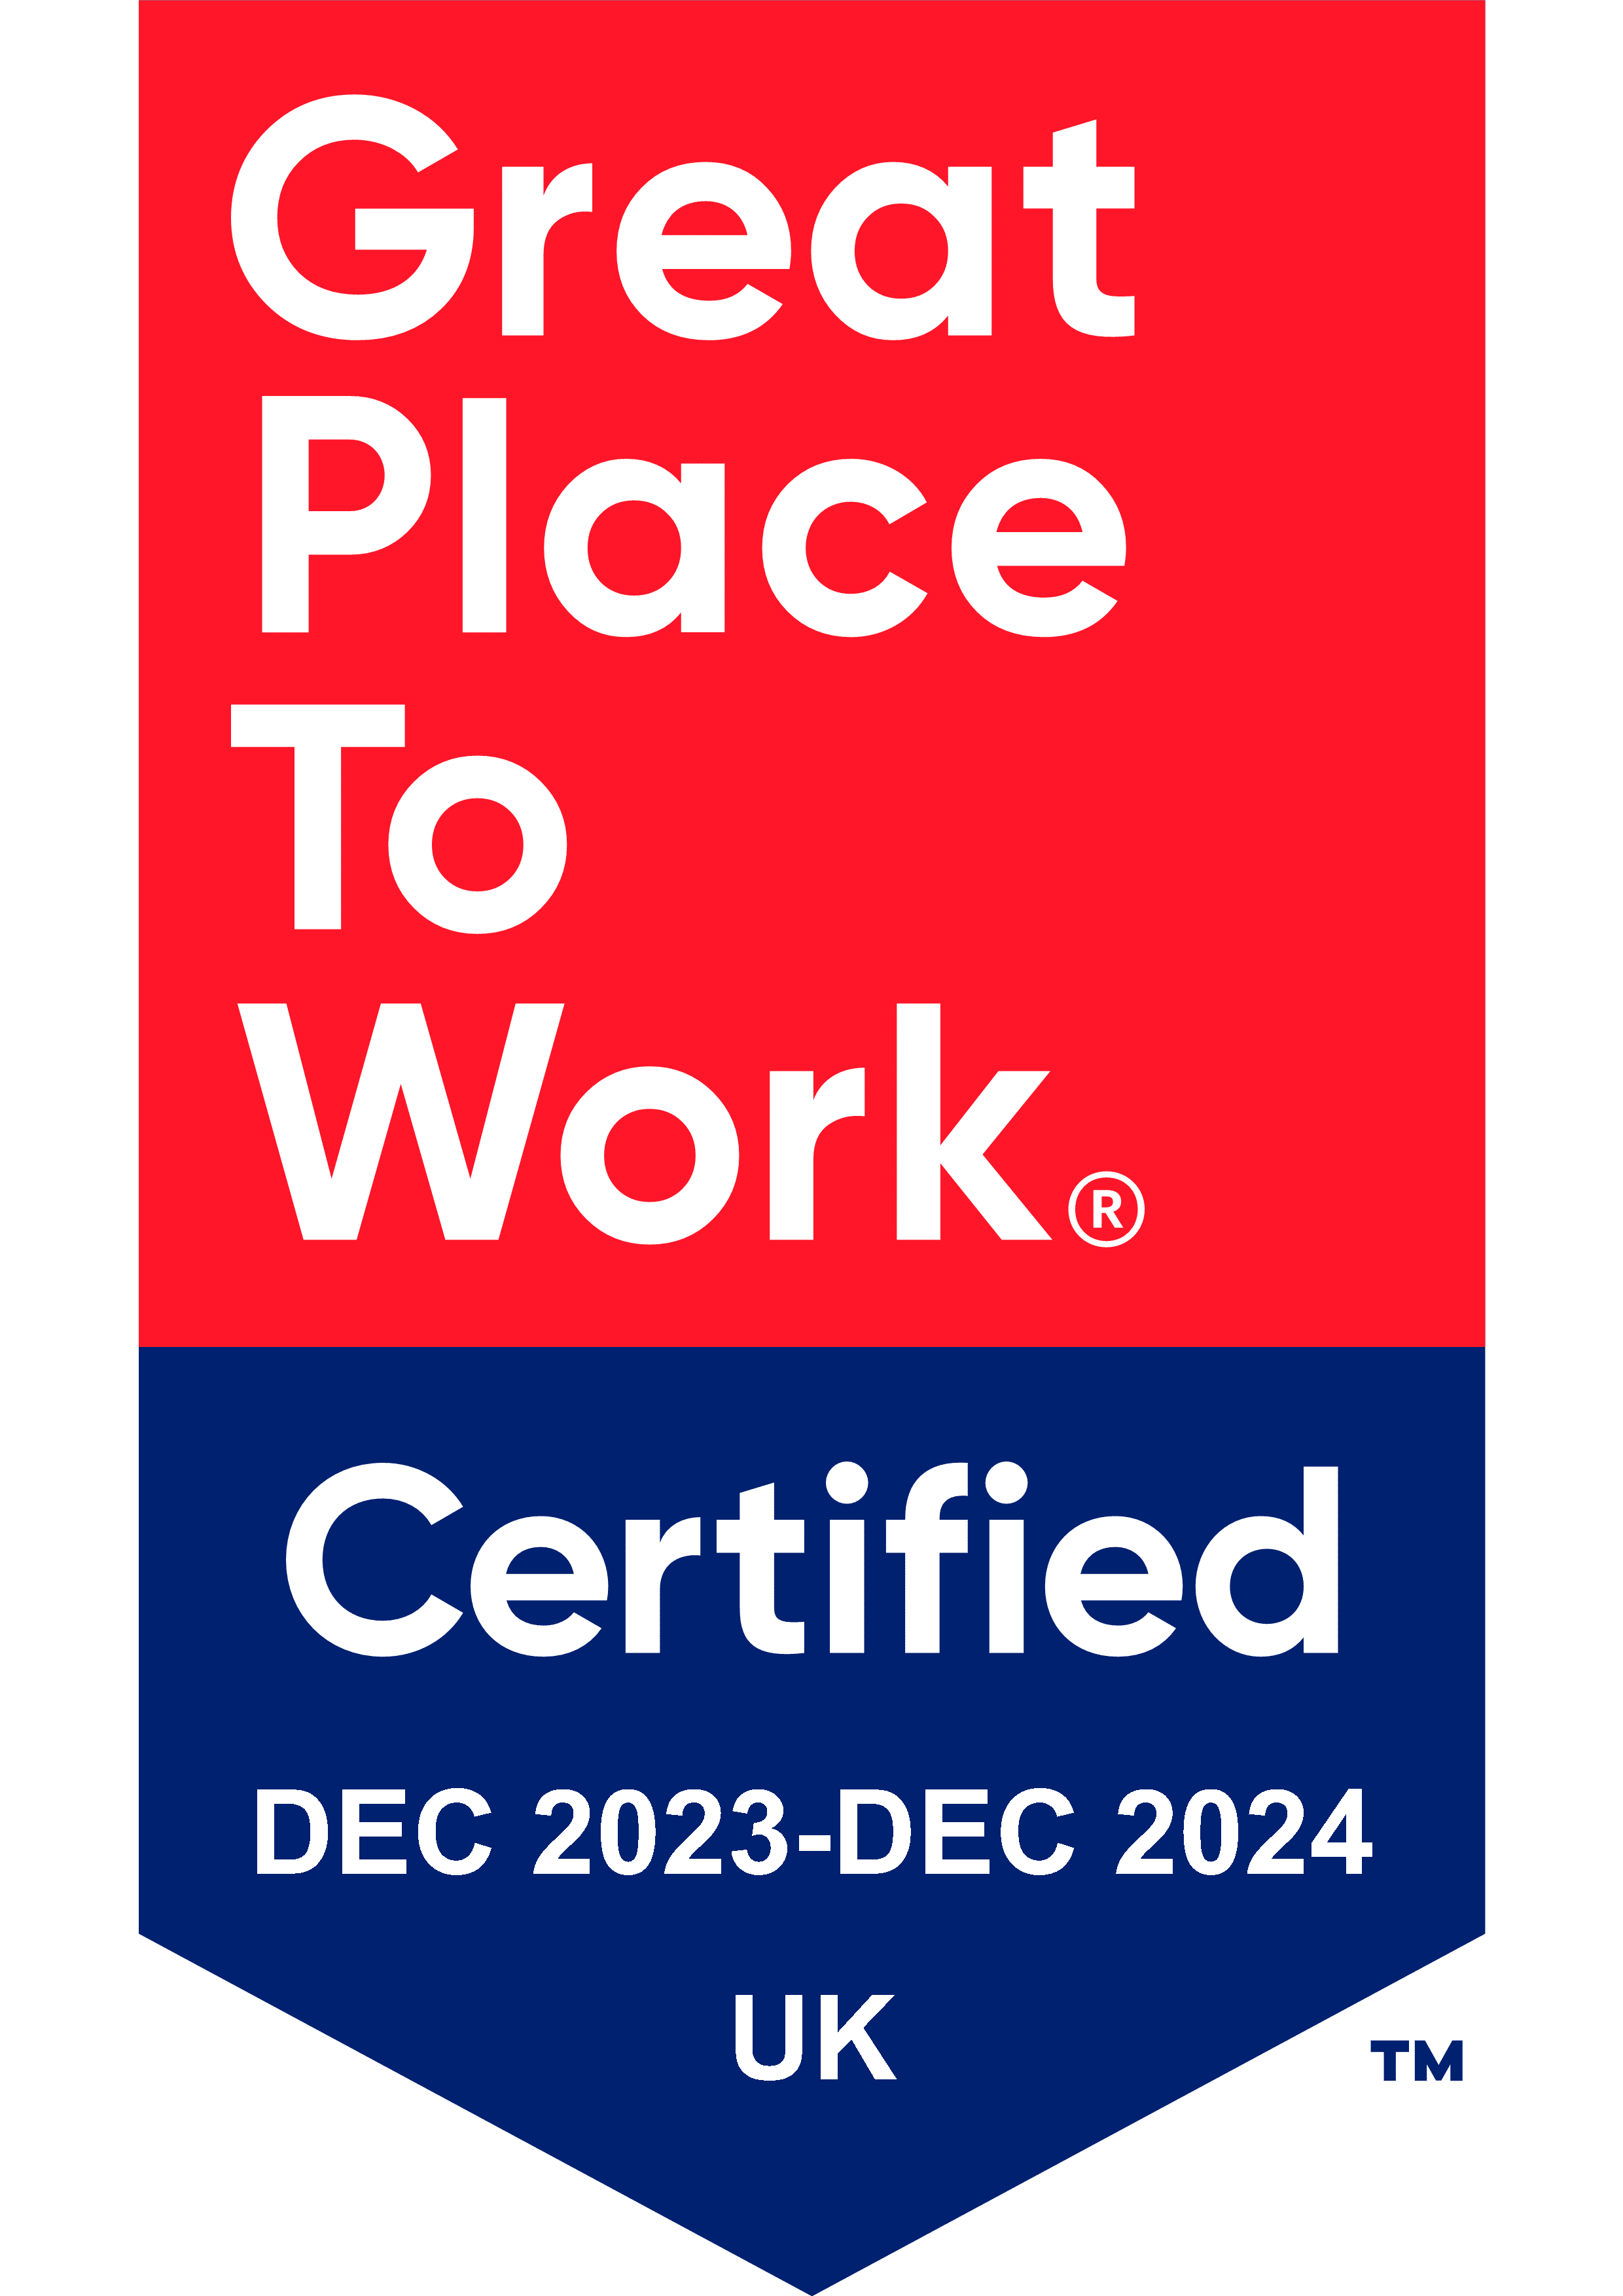 Great Place to Work Certification banner, December 2023 to December 2024